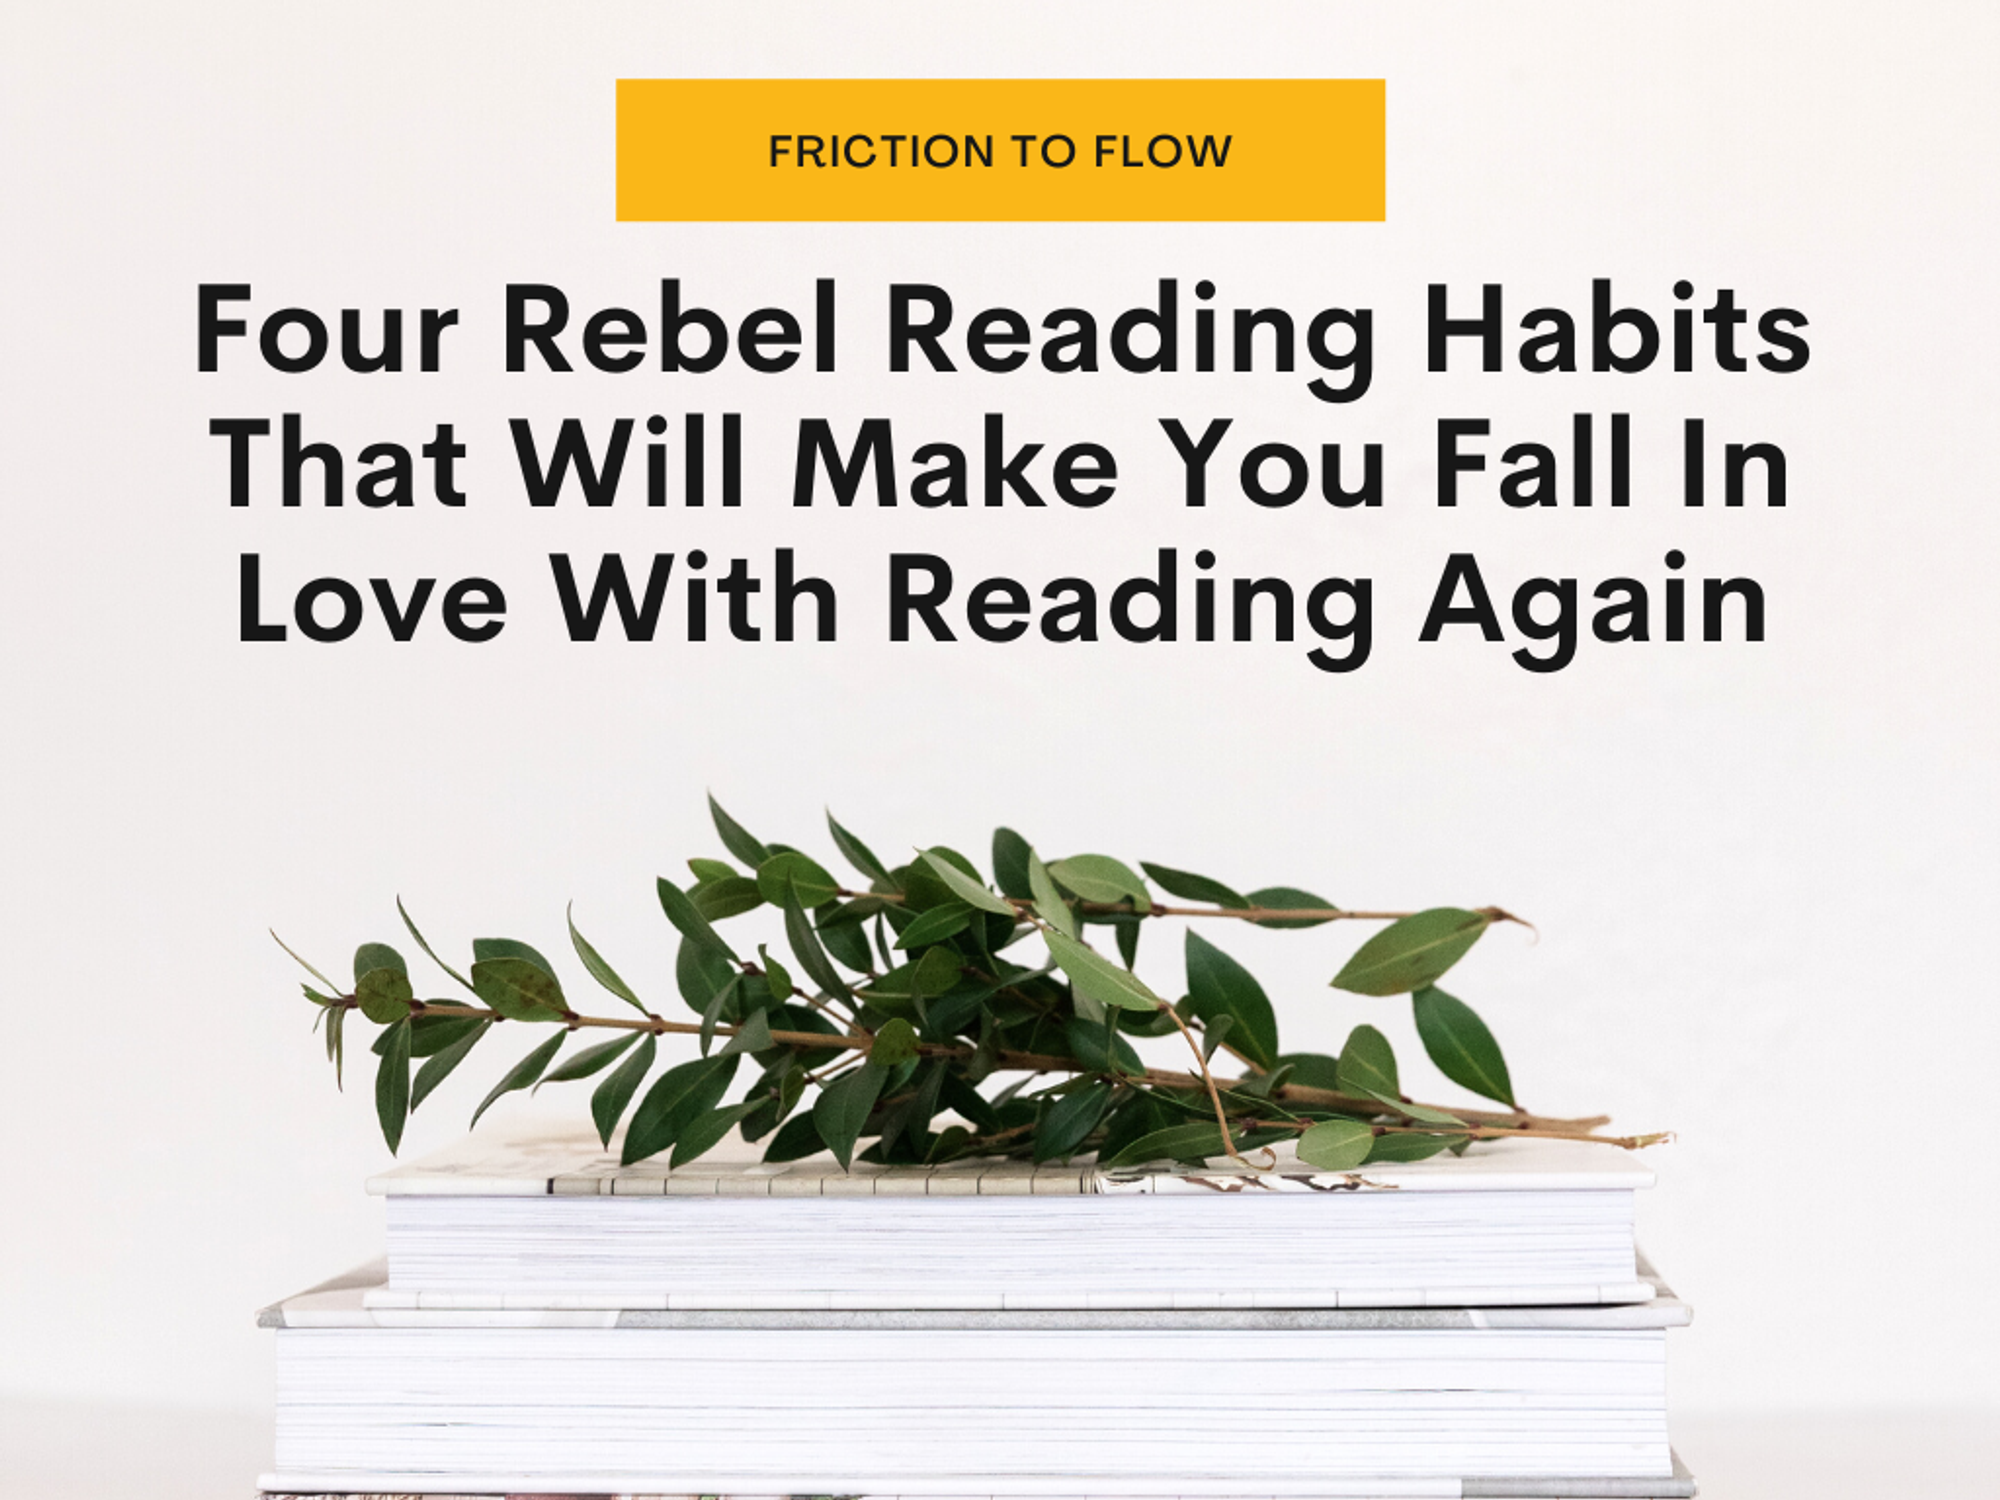 Four Rebel Reading Habits That Will Make You Fall In Love With Reading Again